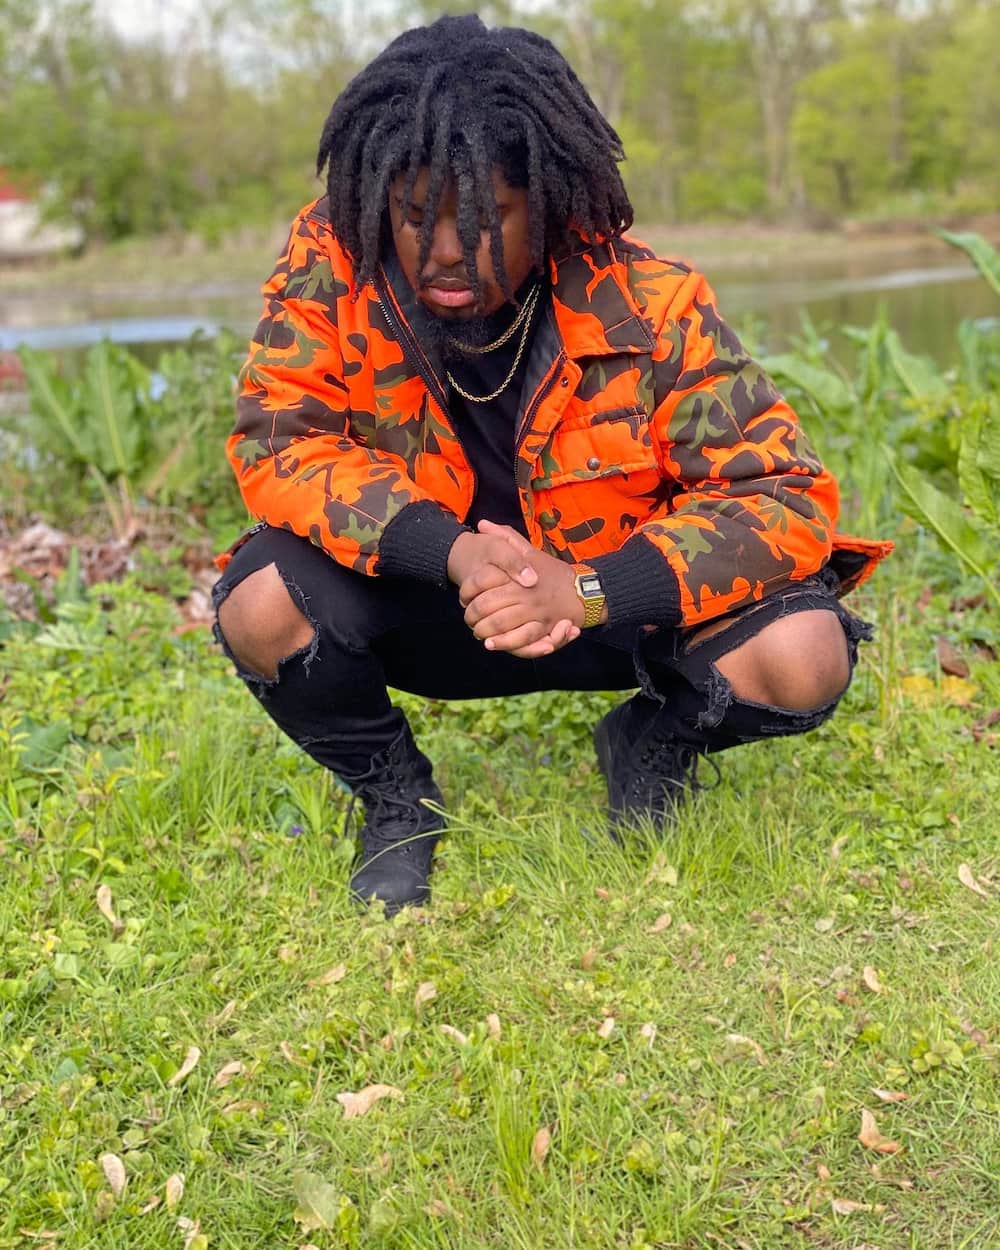 How do you style dreads for men?